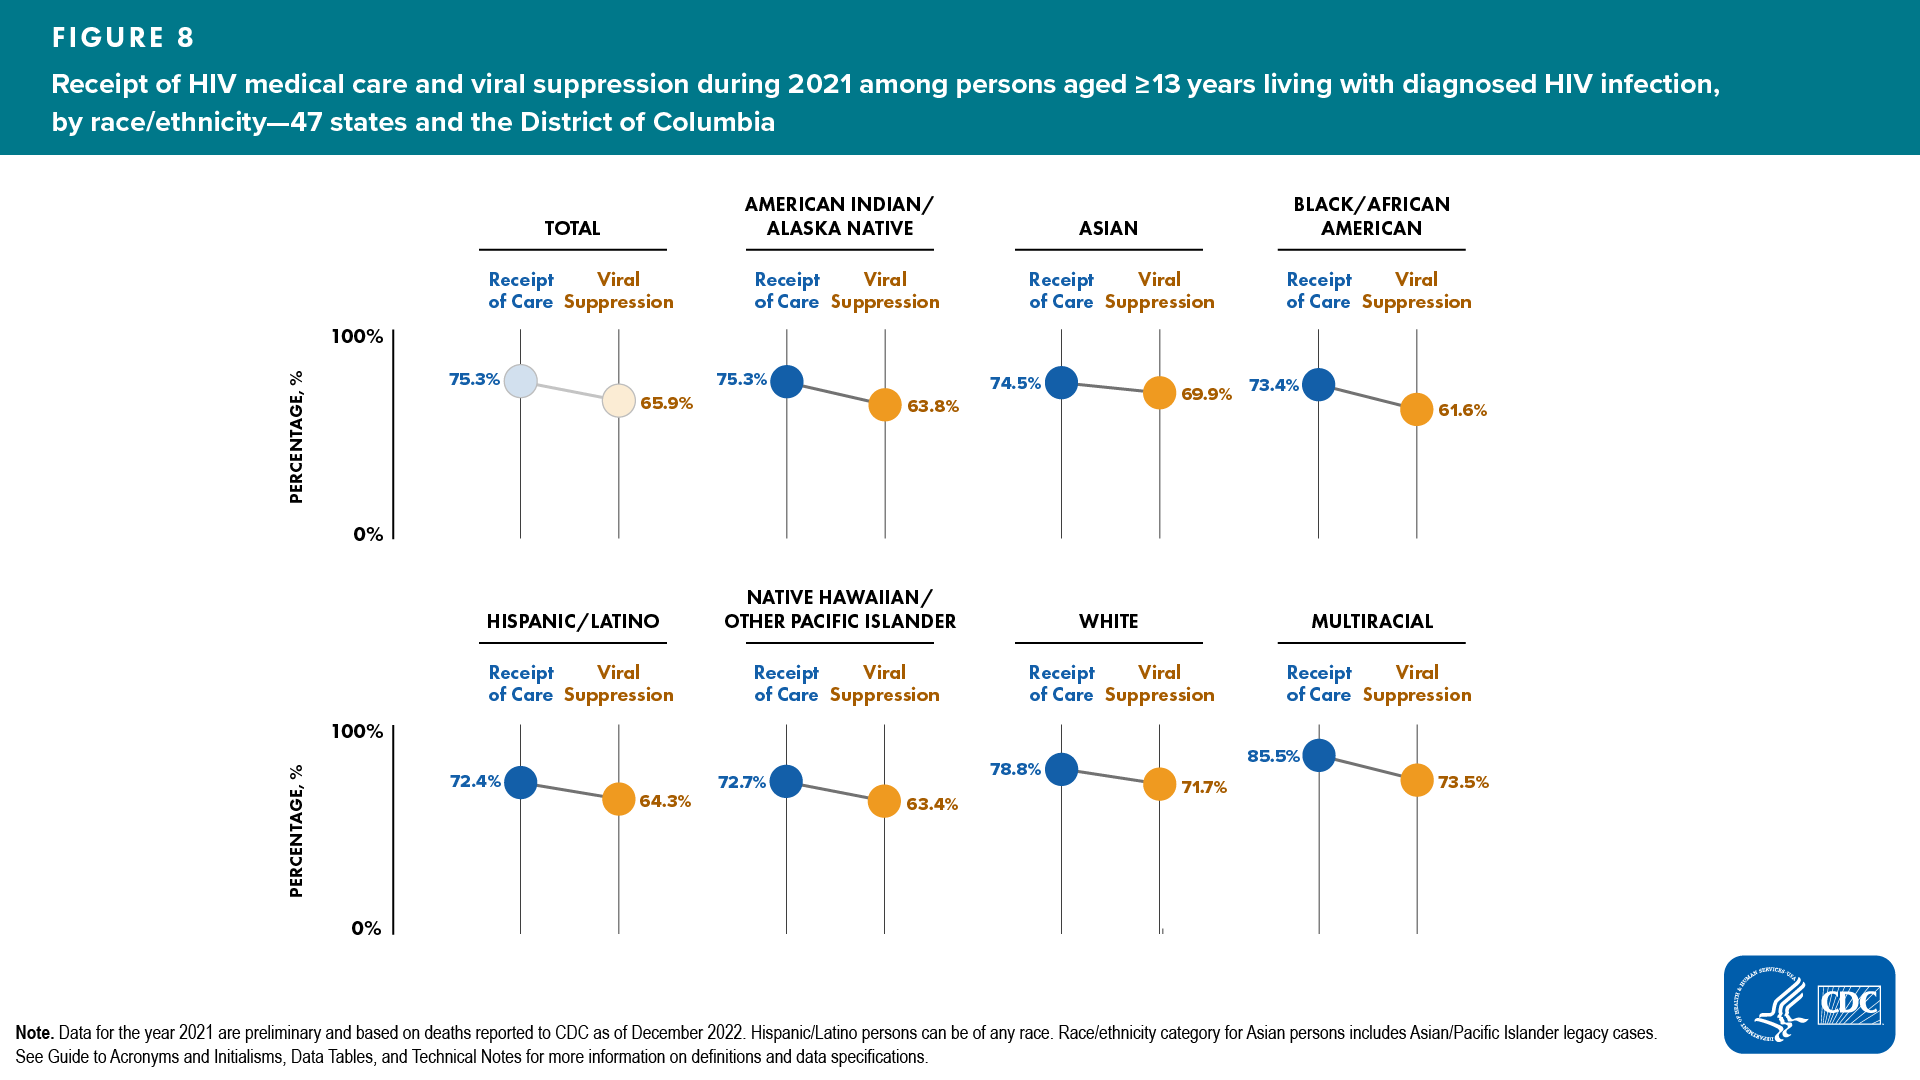 Figure 8. Receipt of HIV medical care and viral suppression during 2021 among persons aged ≥13 years living with diagnosed HIV infection, by race/ethnicity — 47 states and the District of Columbia